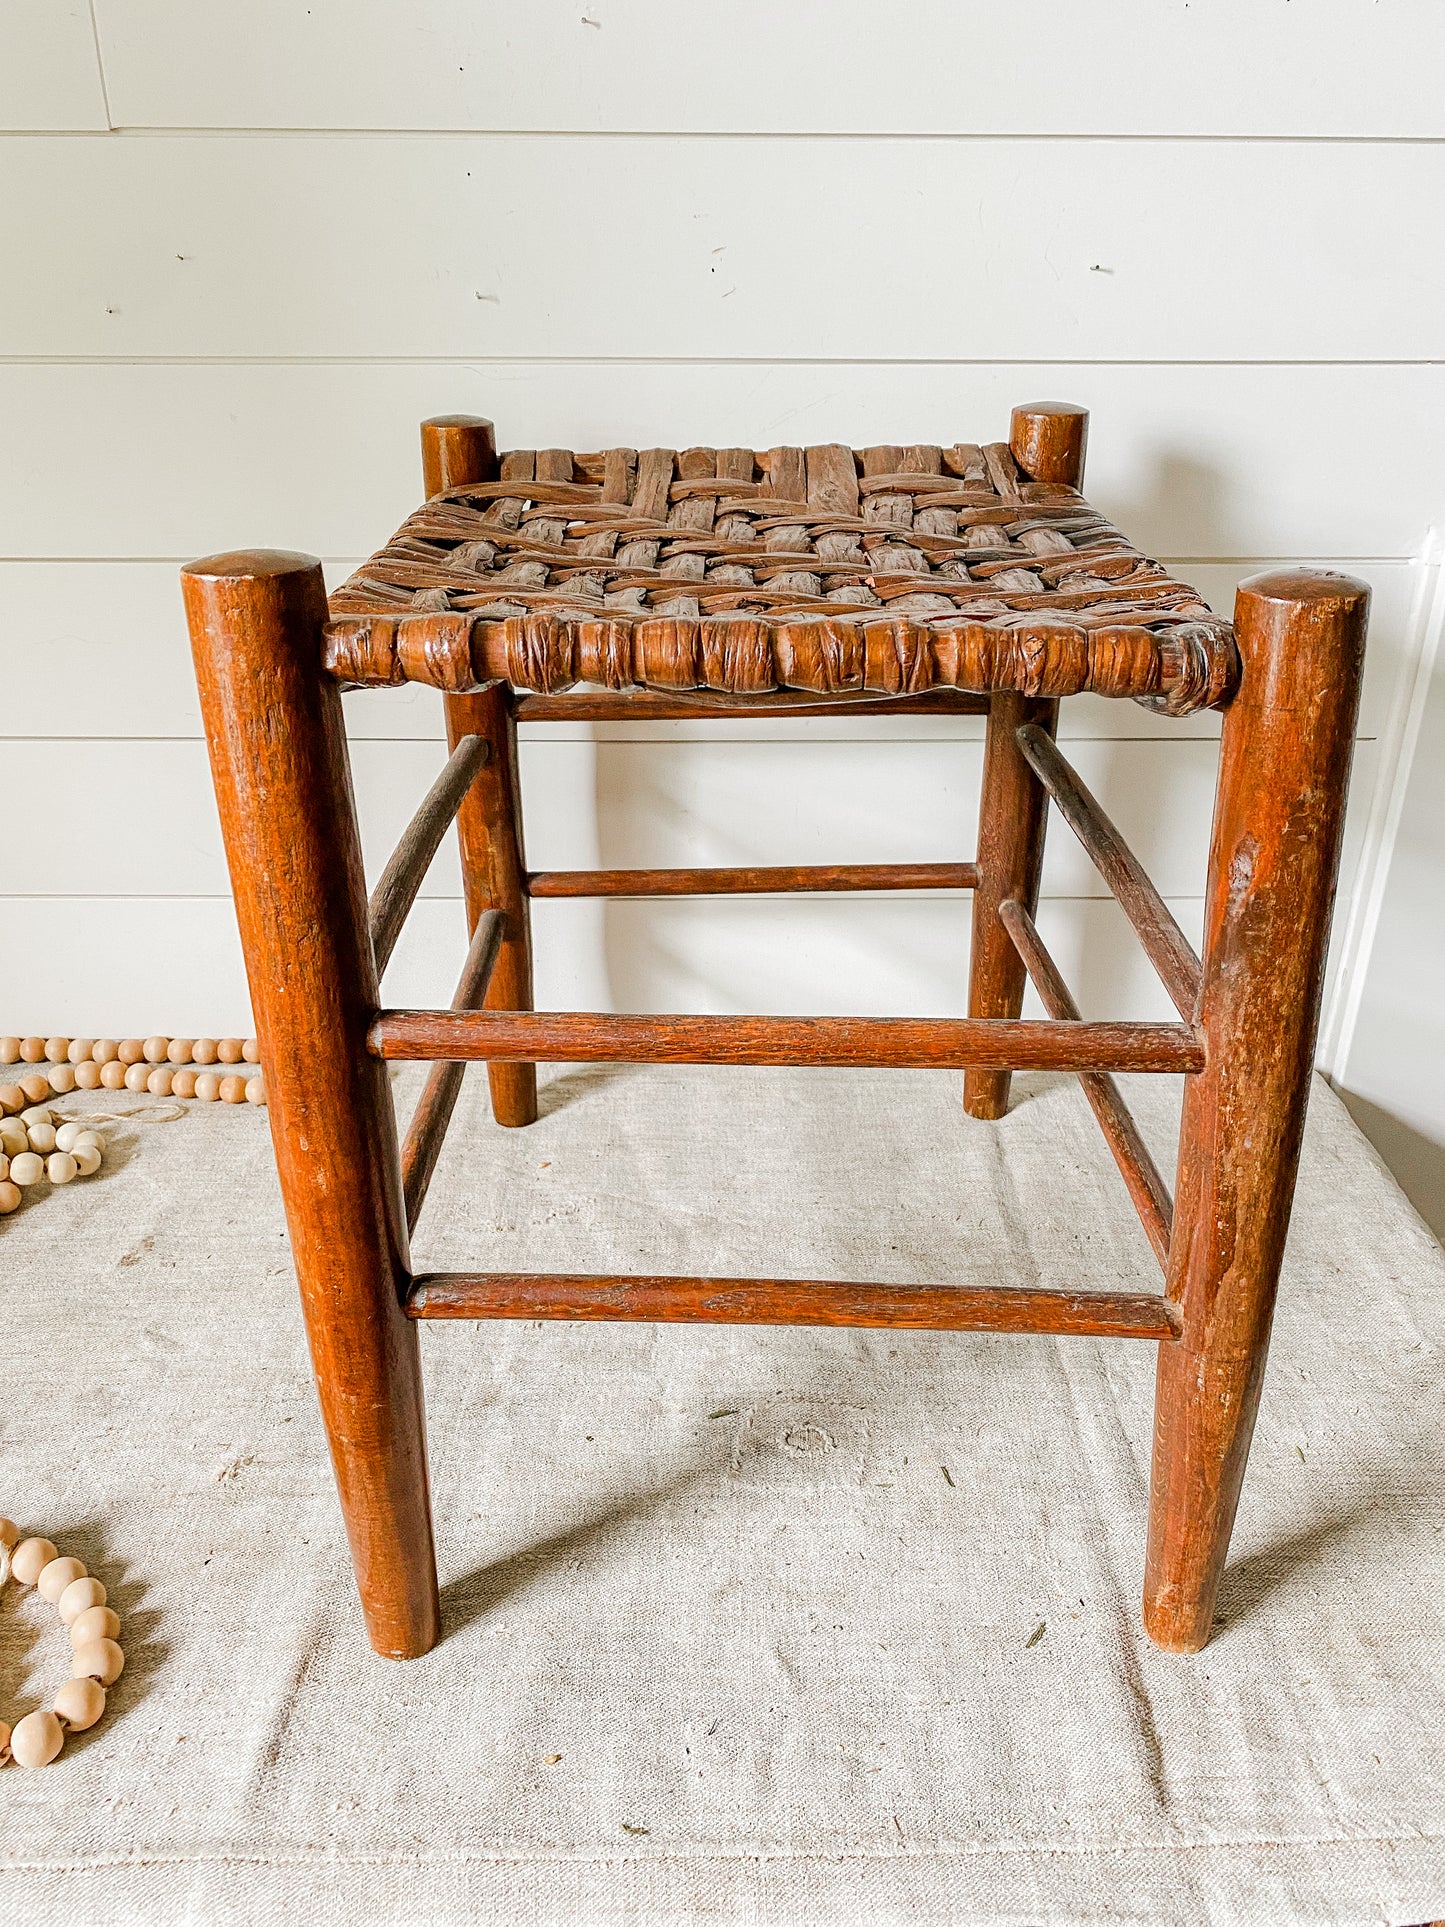 Vintage Handmade Shaker Style 18" Tall Stool with Woven Split Wood Seat | Rustic Farmhouse Plant Stand